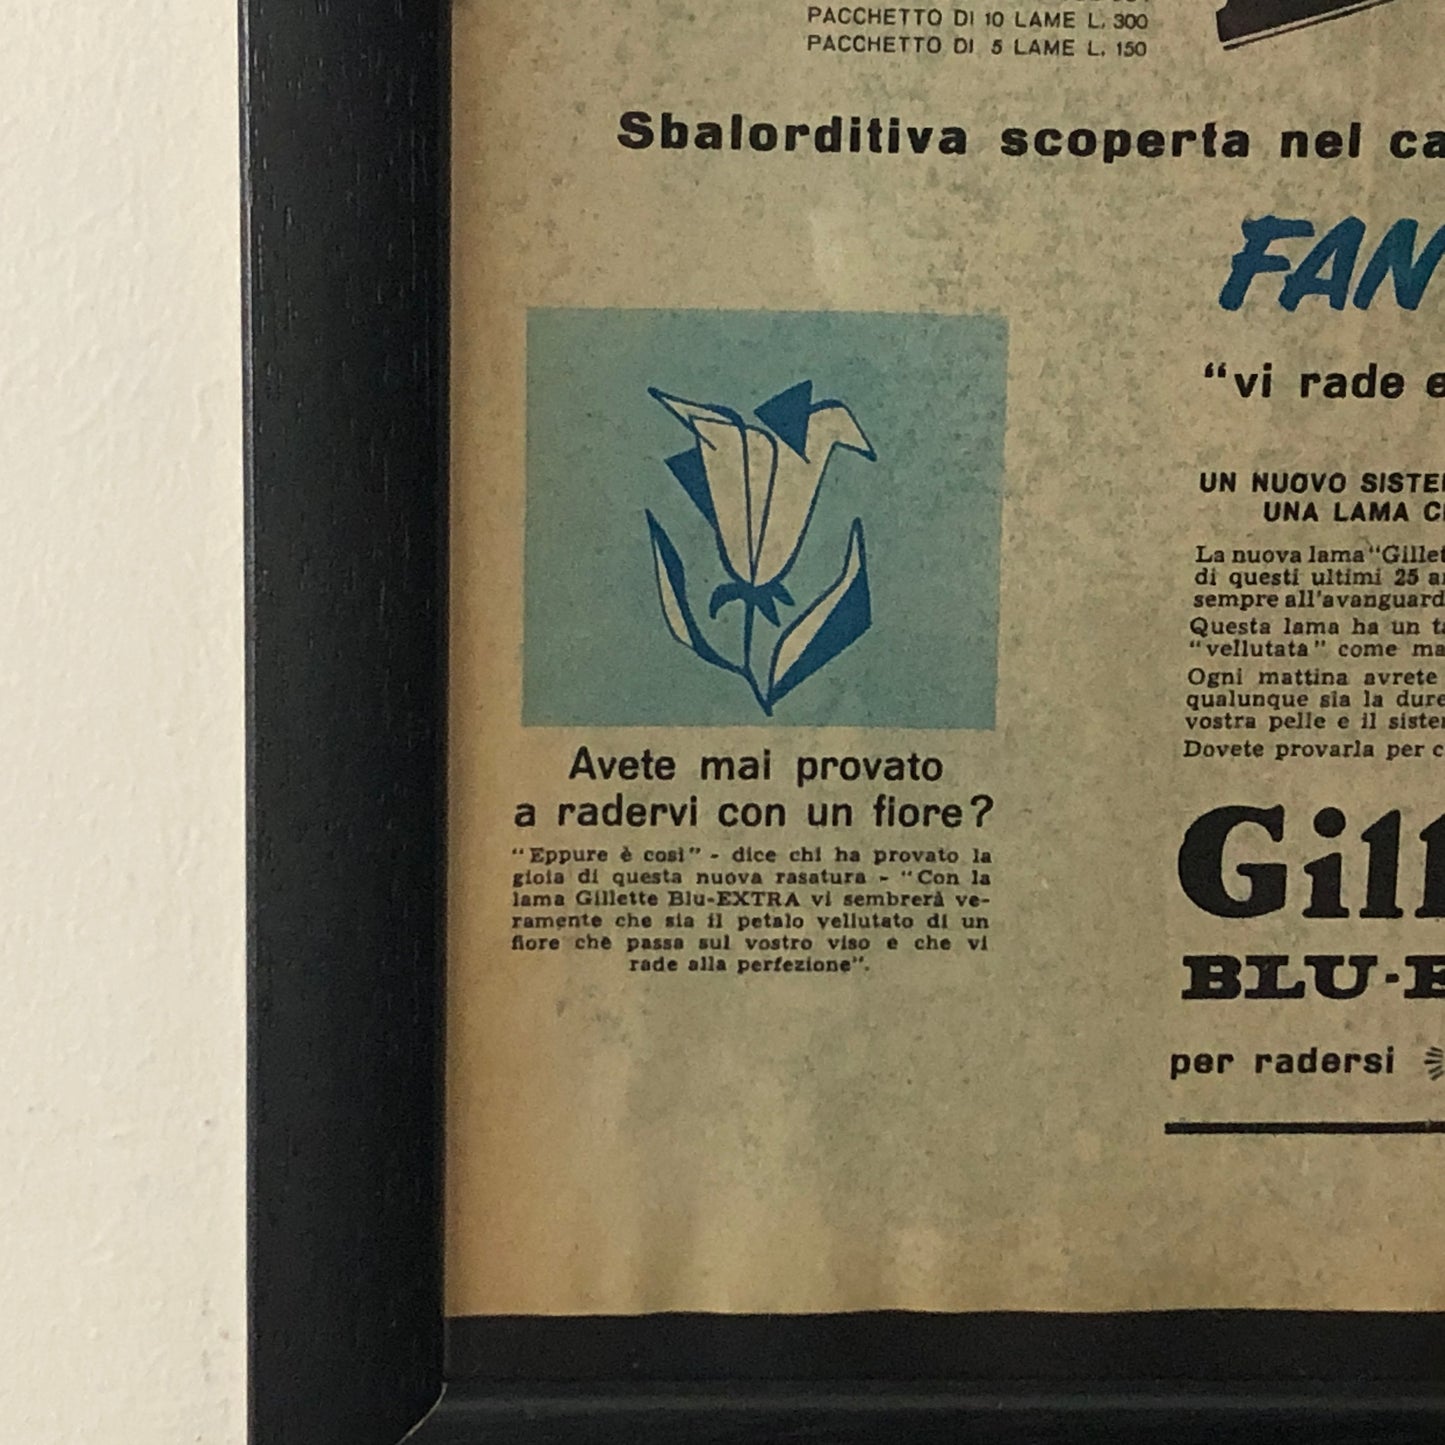 Gillette, Advertising Year 1960 New Gillette Blade with Caption in Italian